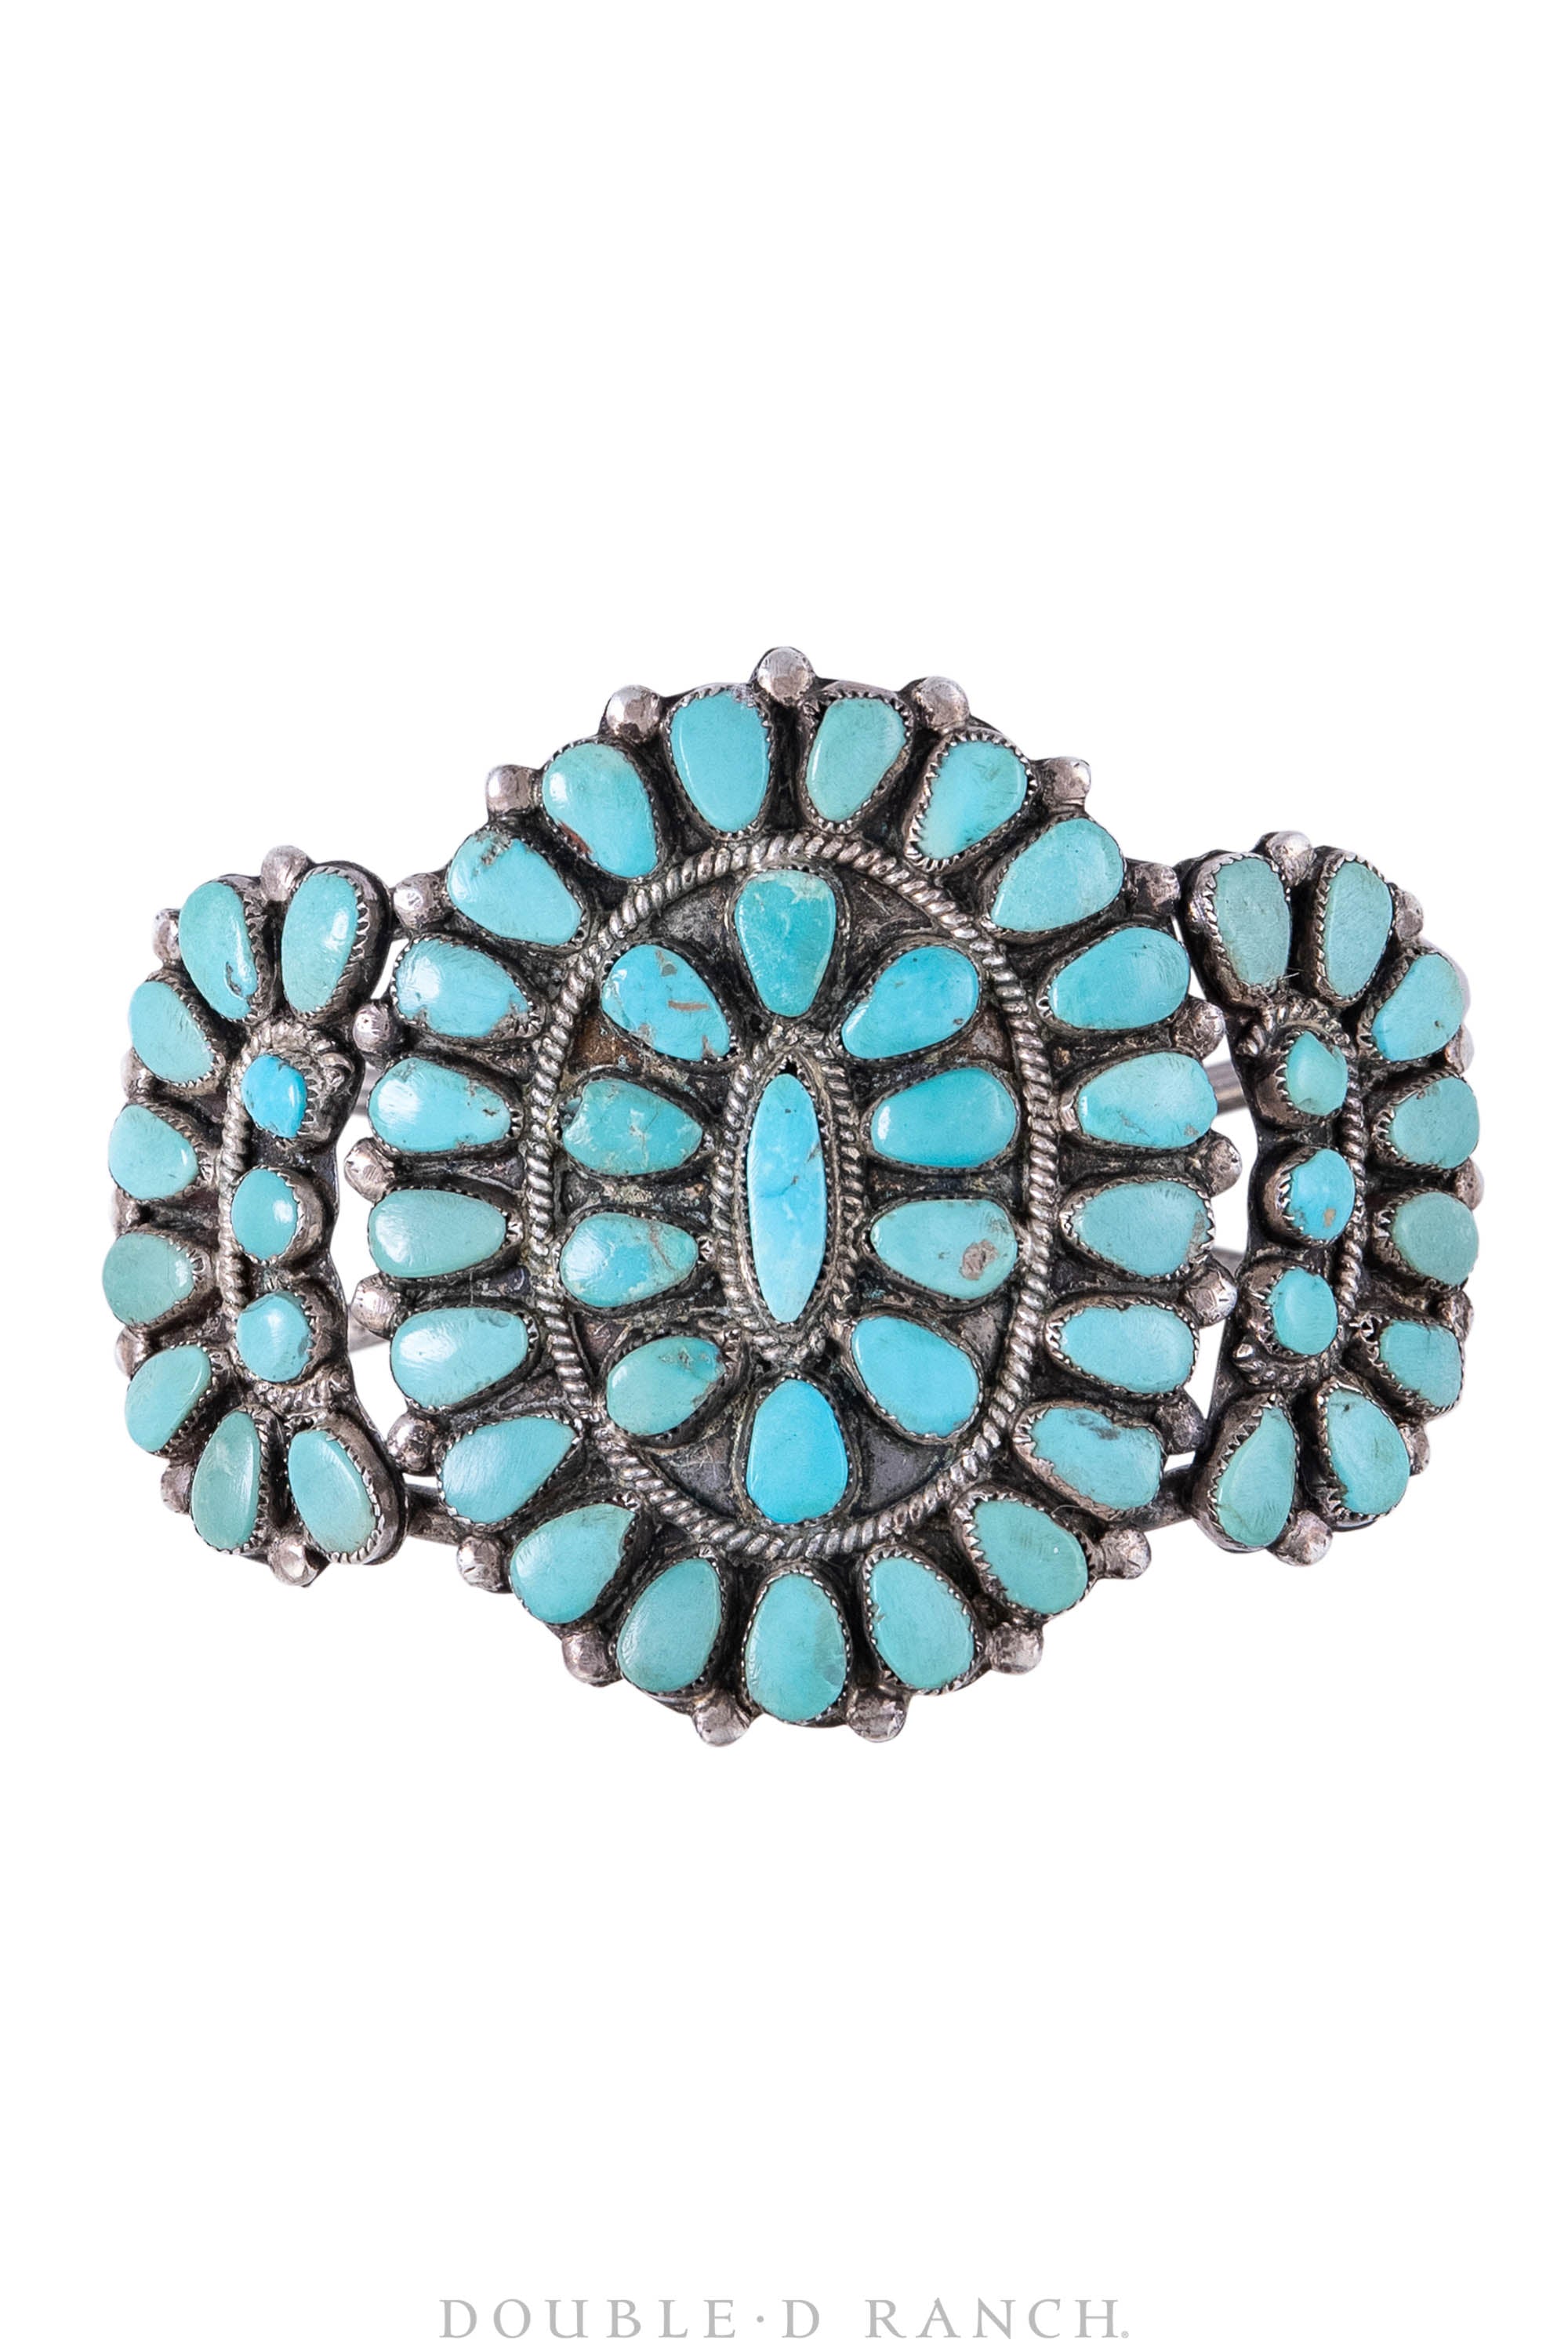 Cuff, Cluster, Turquoise, Vintage, Private Collection, 2867